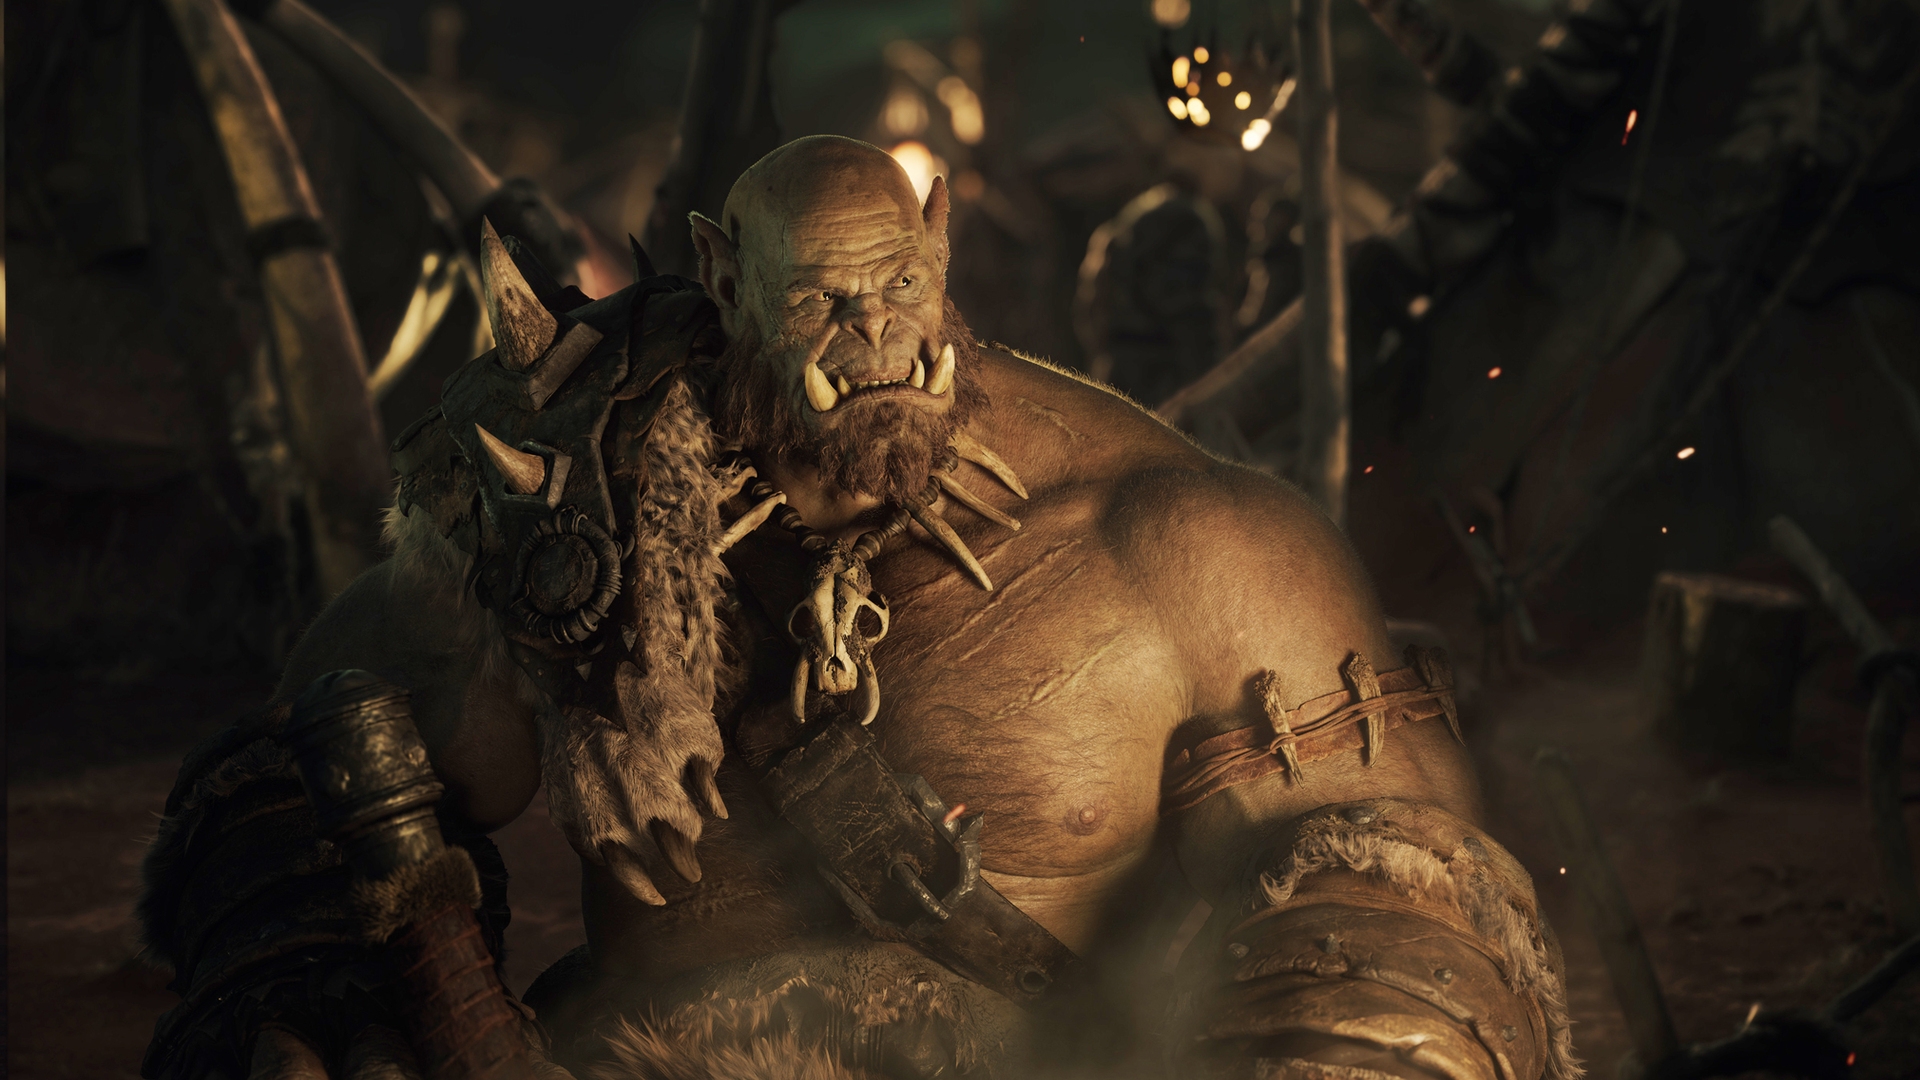 Warcraft Movie 2016 Orc for 1920 x 1080 HDTV 1080p resolution